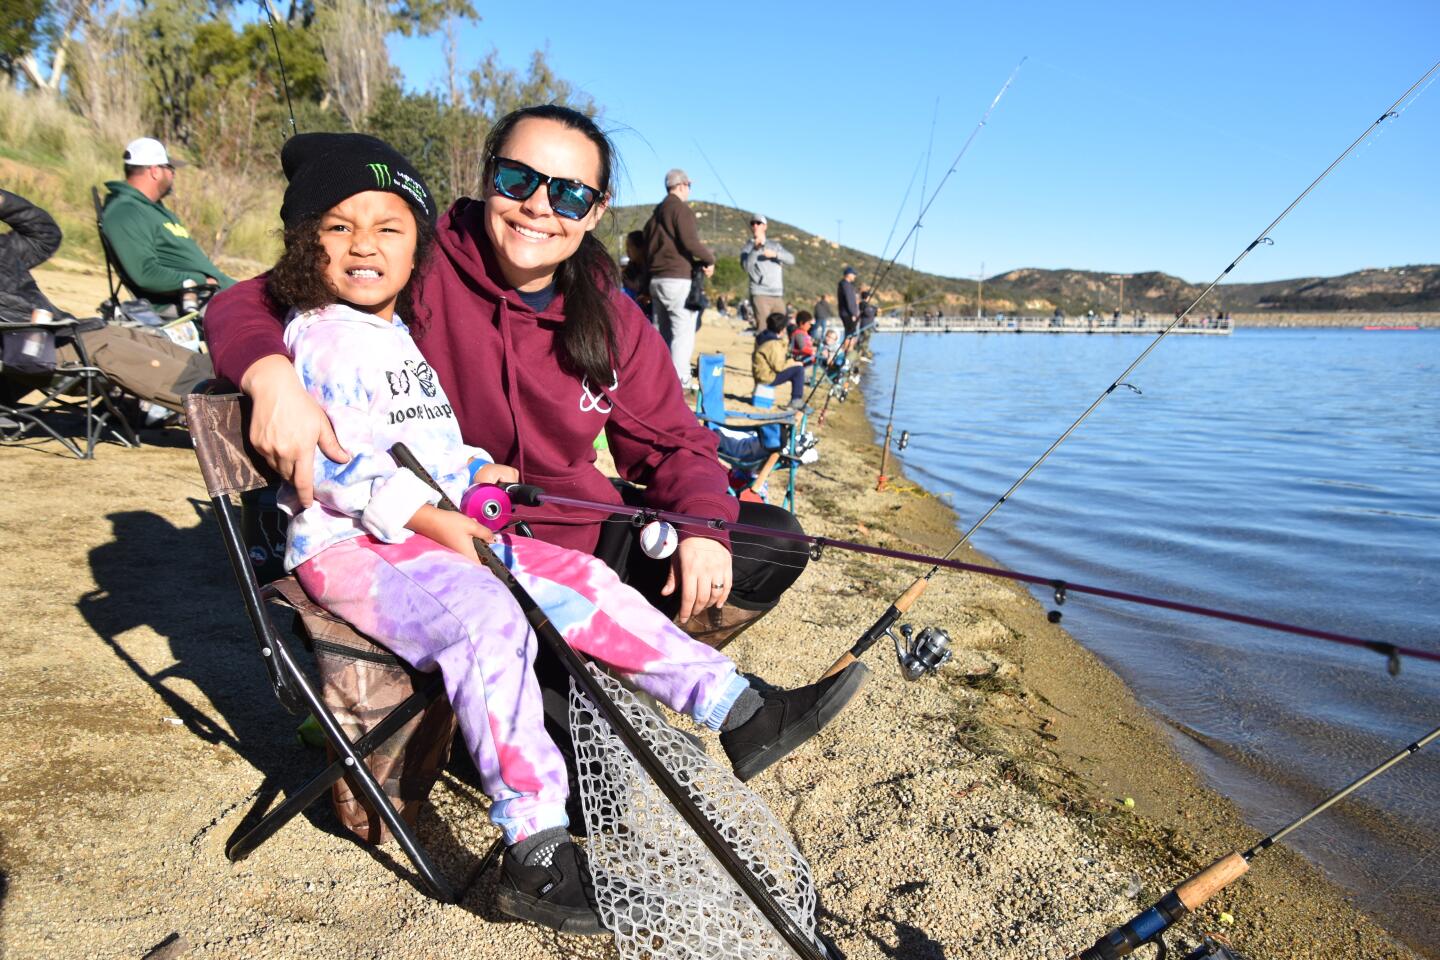 About 400 kids enjoy a day at Lake Poway for fishing derby - Pomerado News